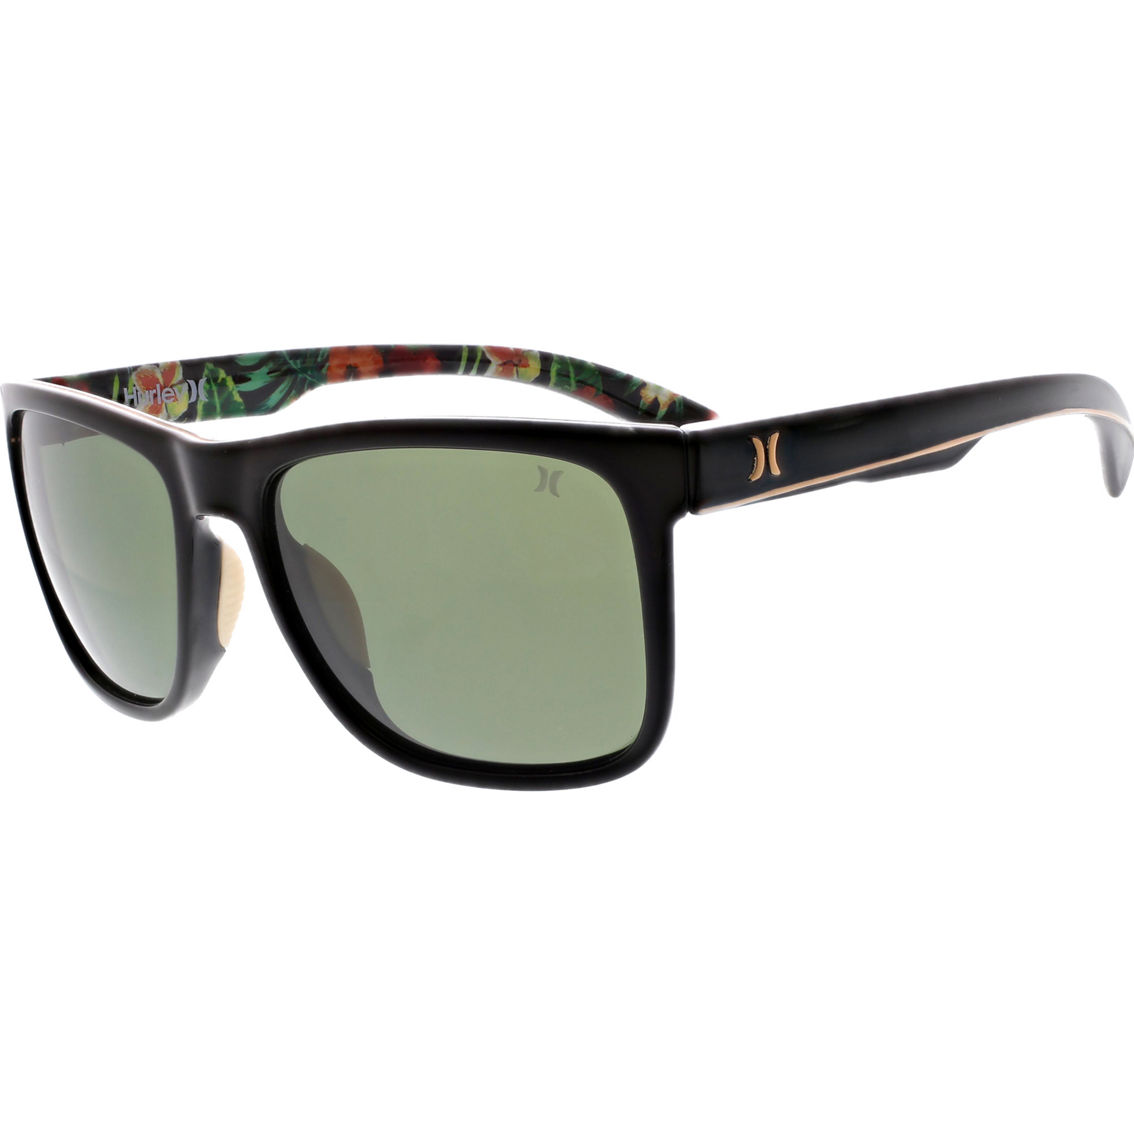 Hurley New Schoolers Square Polarized Sunglasses Hsm1004p 003, Sunglasses, Clothing & Accessories